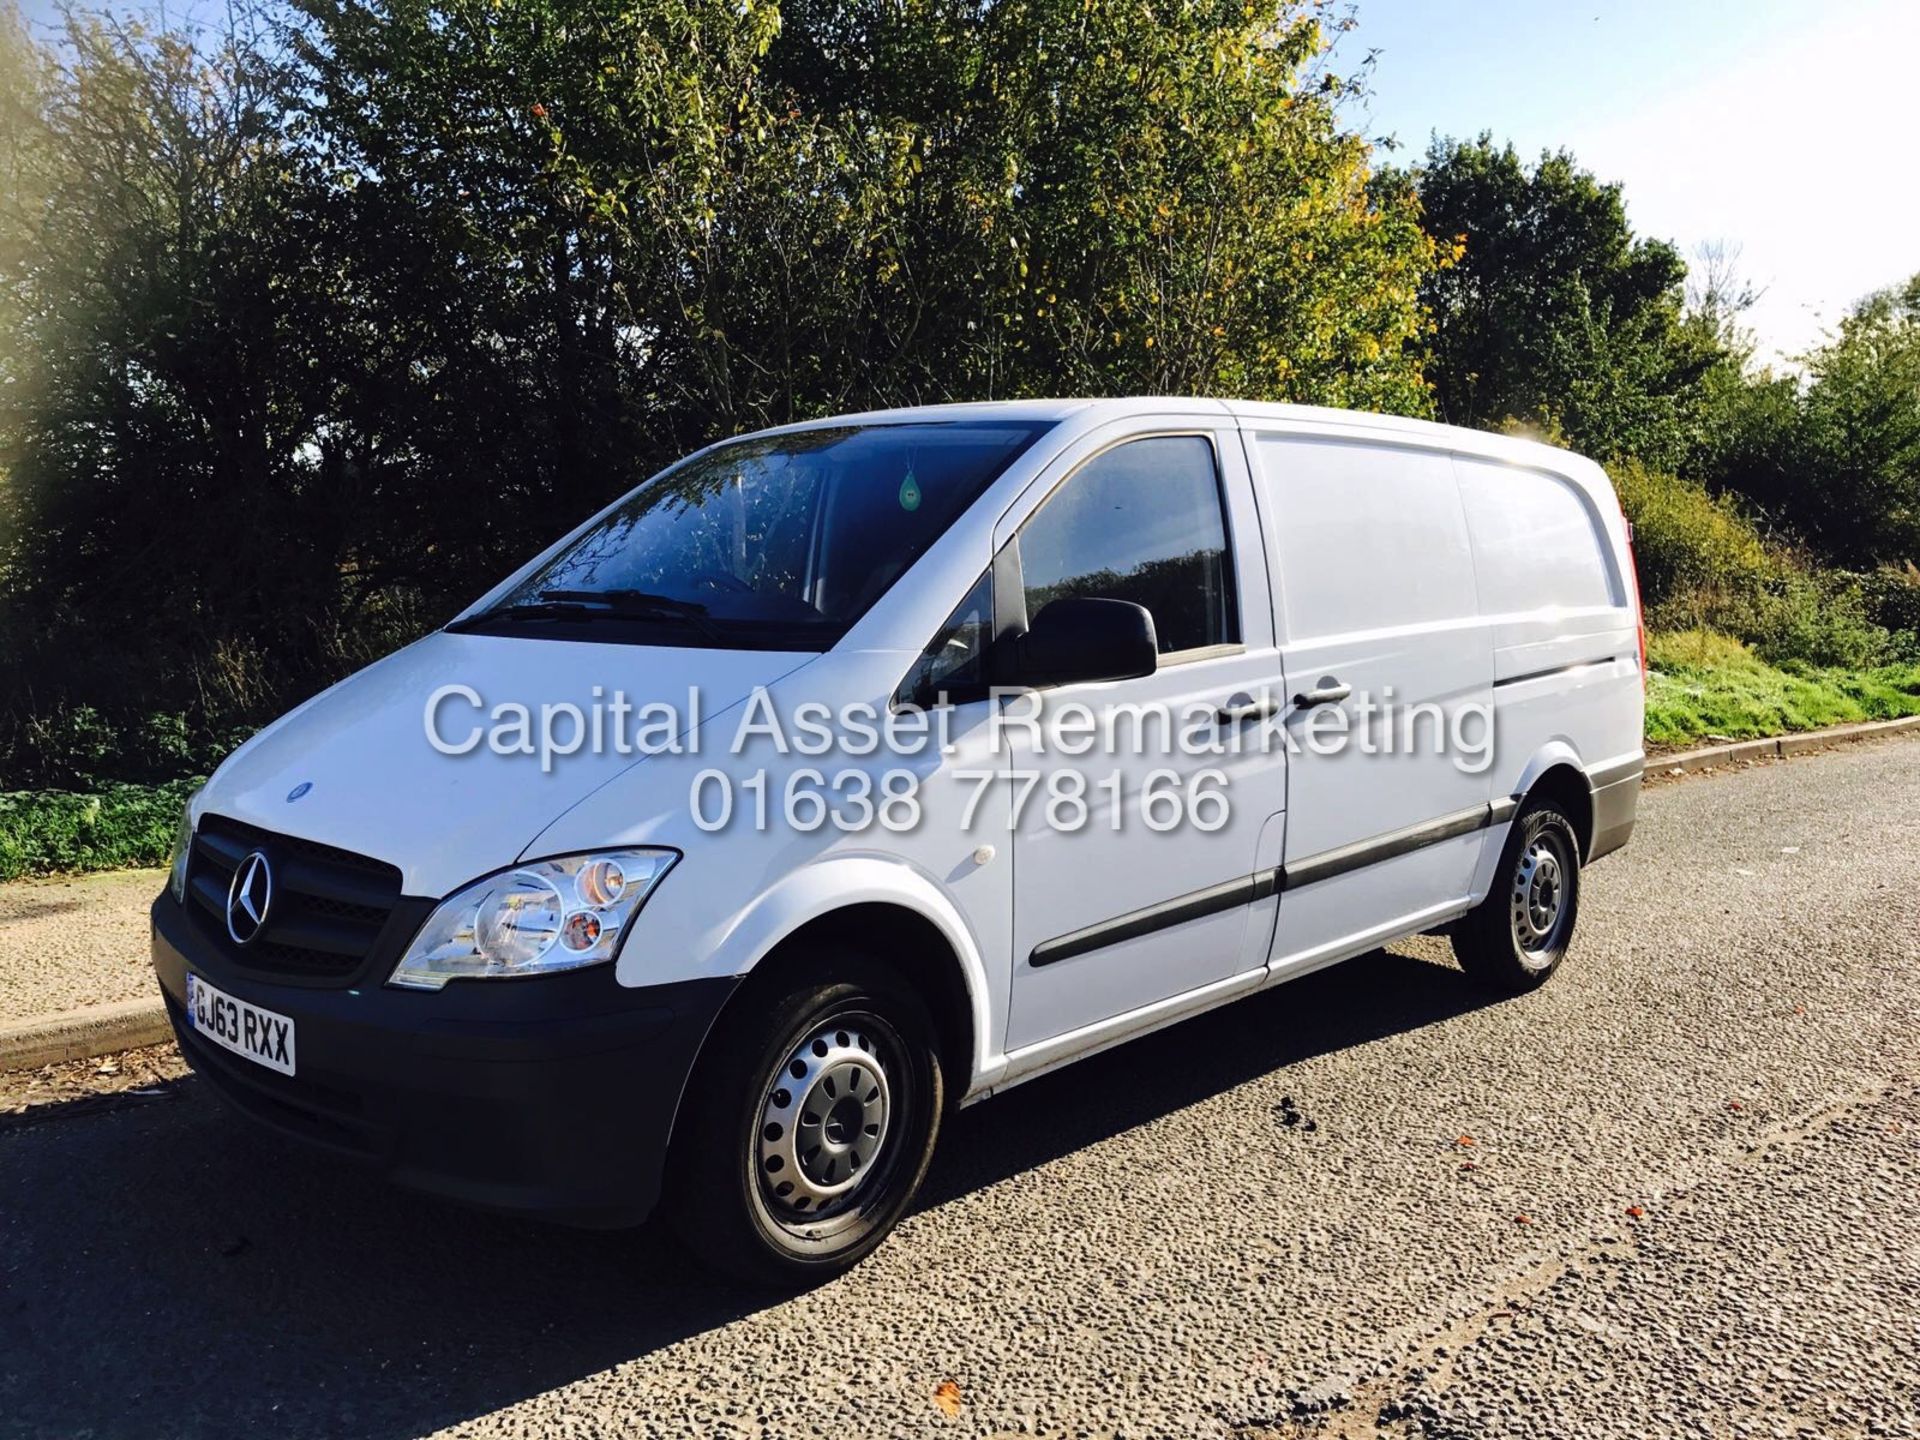 MERCEDES VITO 113CDI "136BHP - 6 SPEED" LWB (2014 MODEL - NEW SHAPE) ONLY 62K - AIR CON - ELEC PACK